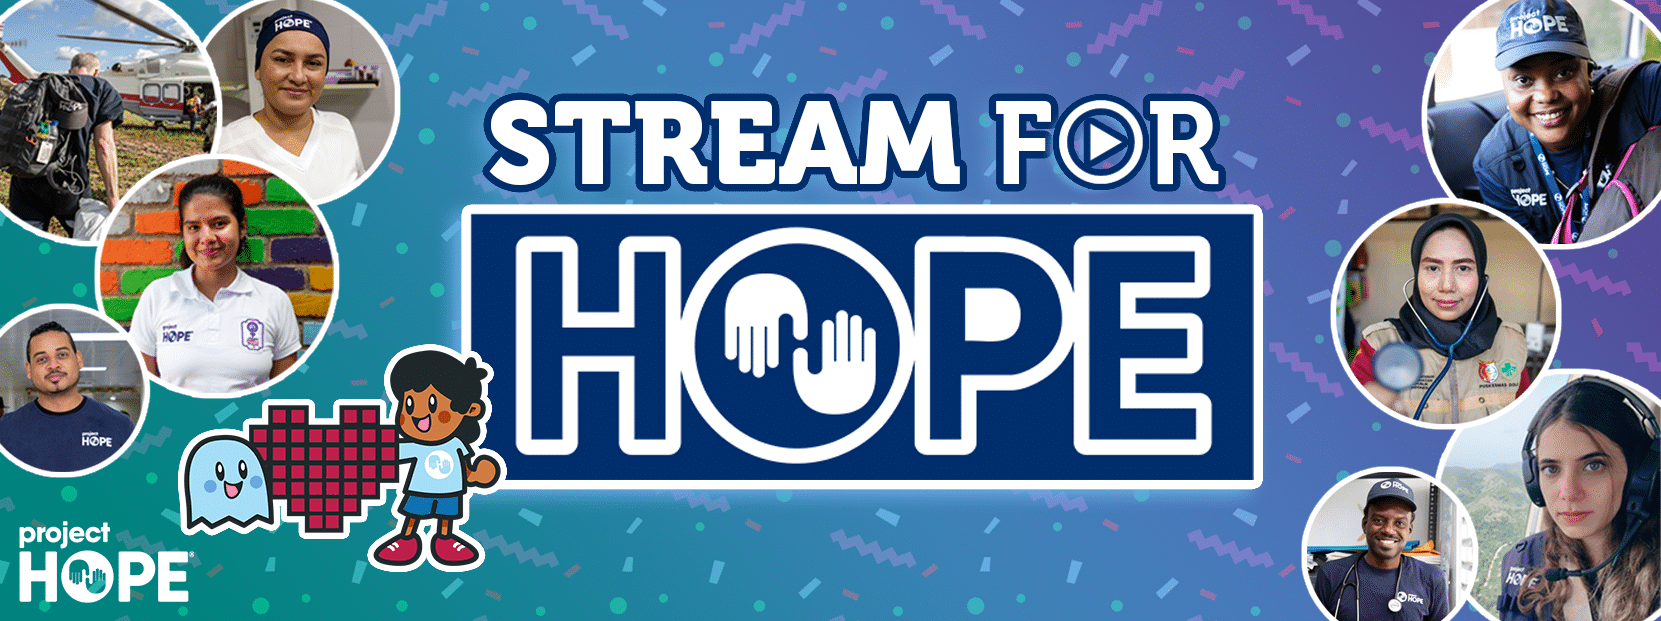 stream for hope graphic